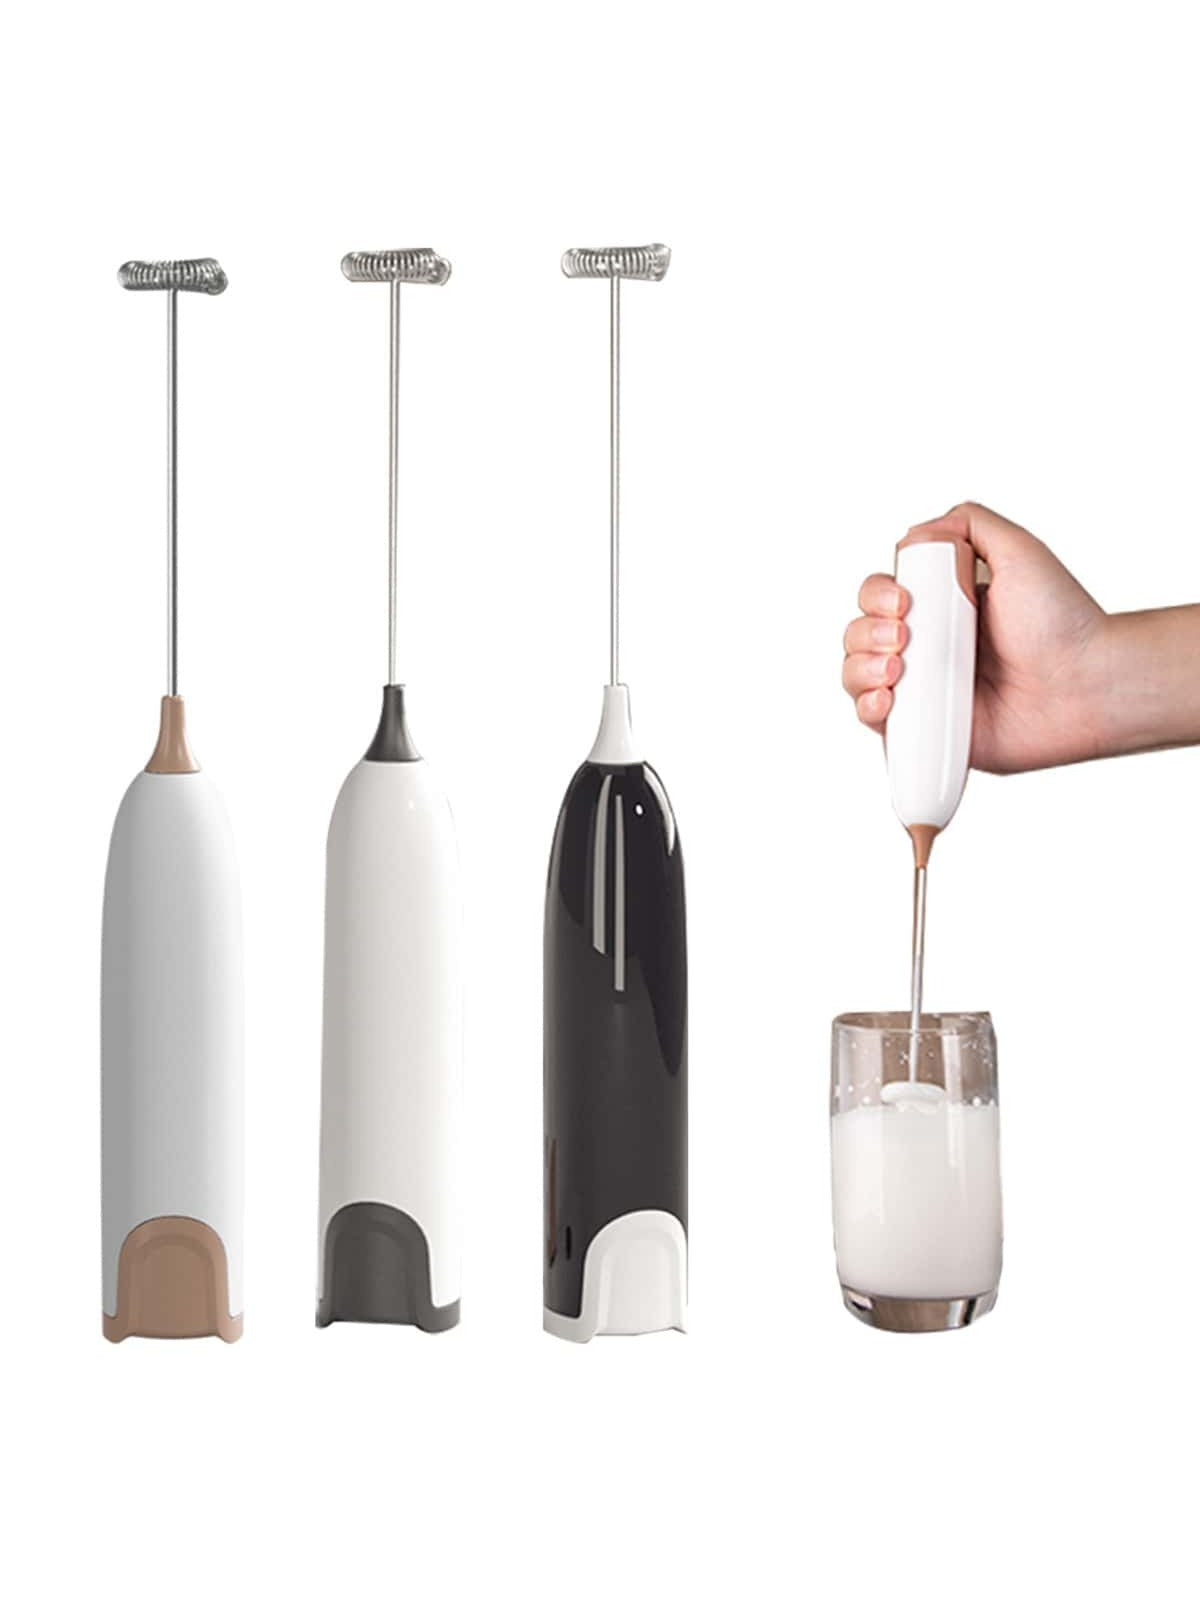 Coffee Egg Beater Whisk Latte Stirrer Frother Electric Milk Mixer